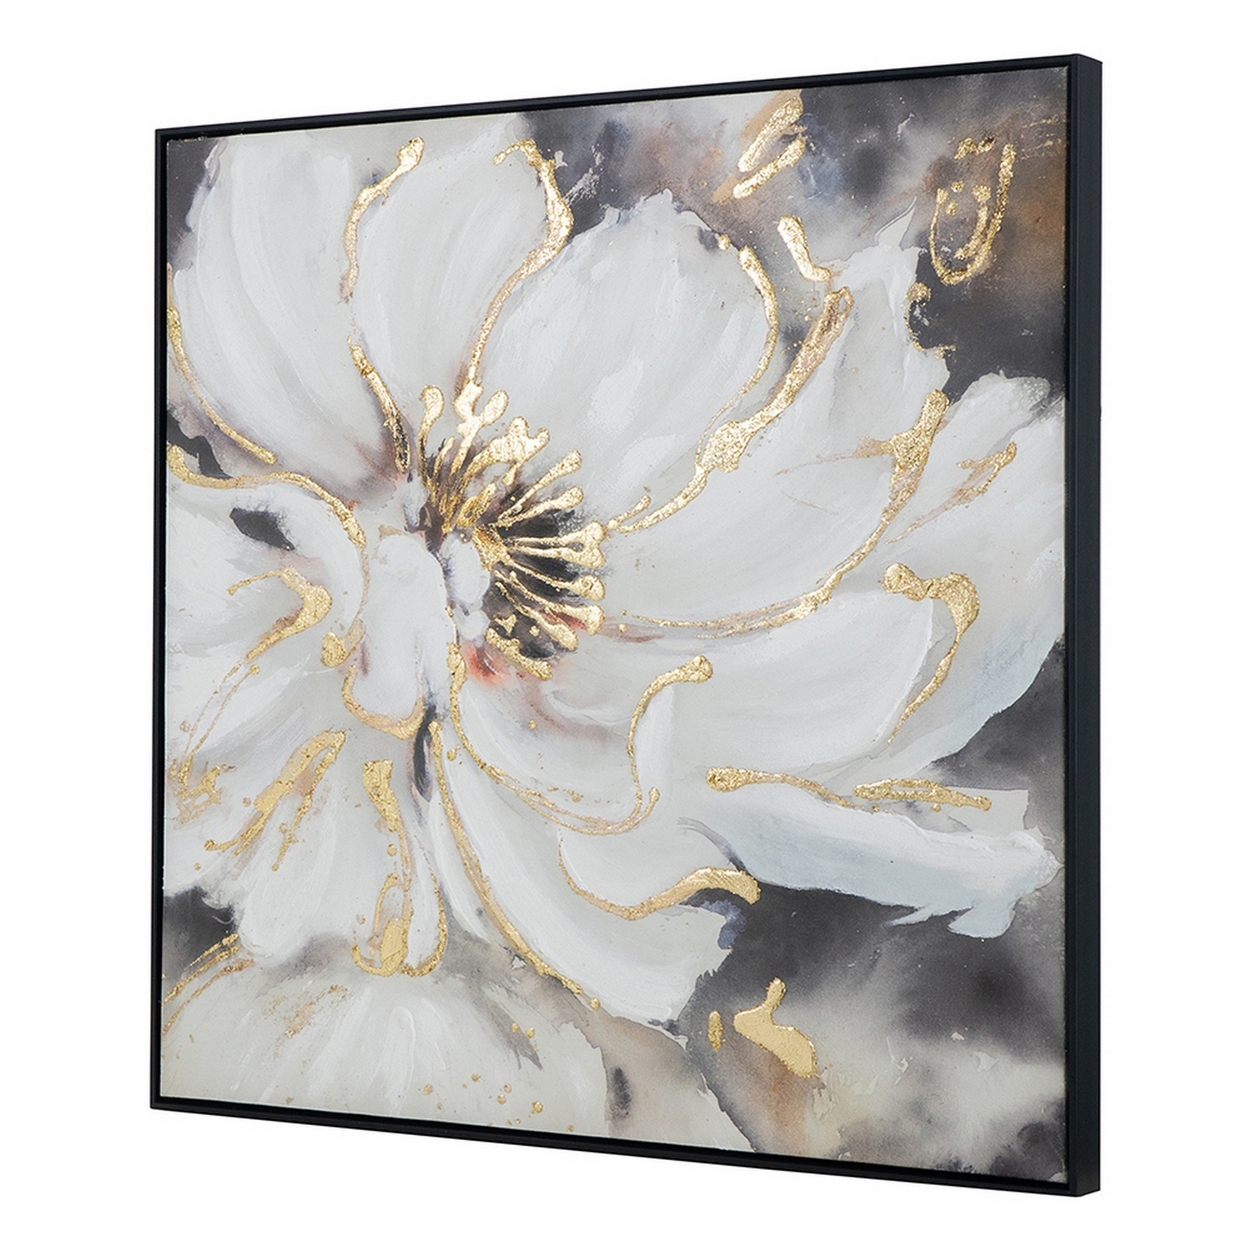 36 X 36 Inch Framed Wall Art, Floral Oil Painting On Canvas, White Gold- Saltoro Sherpi